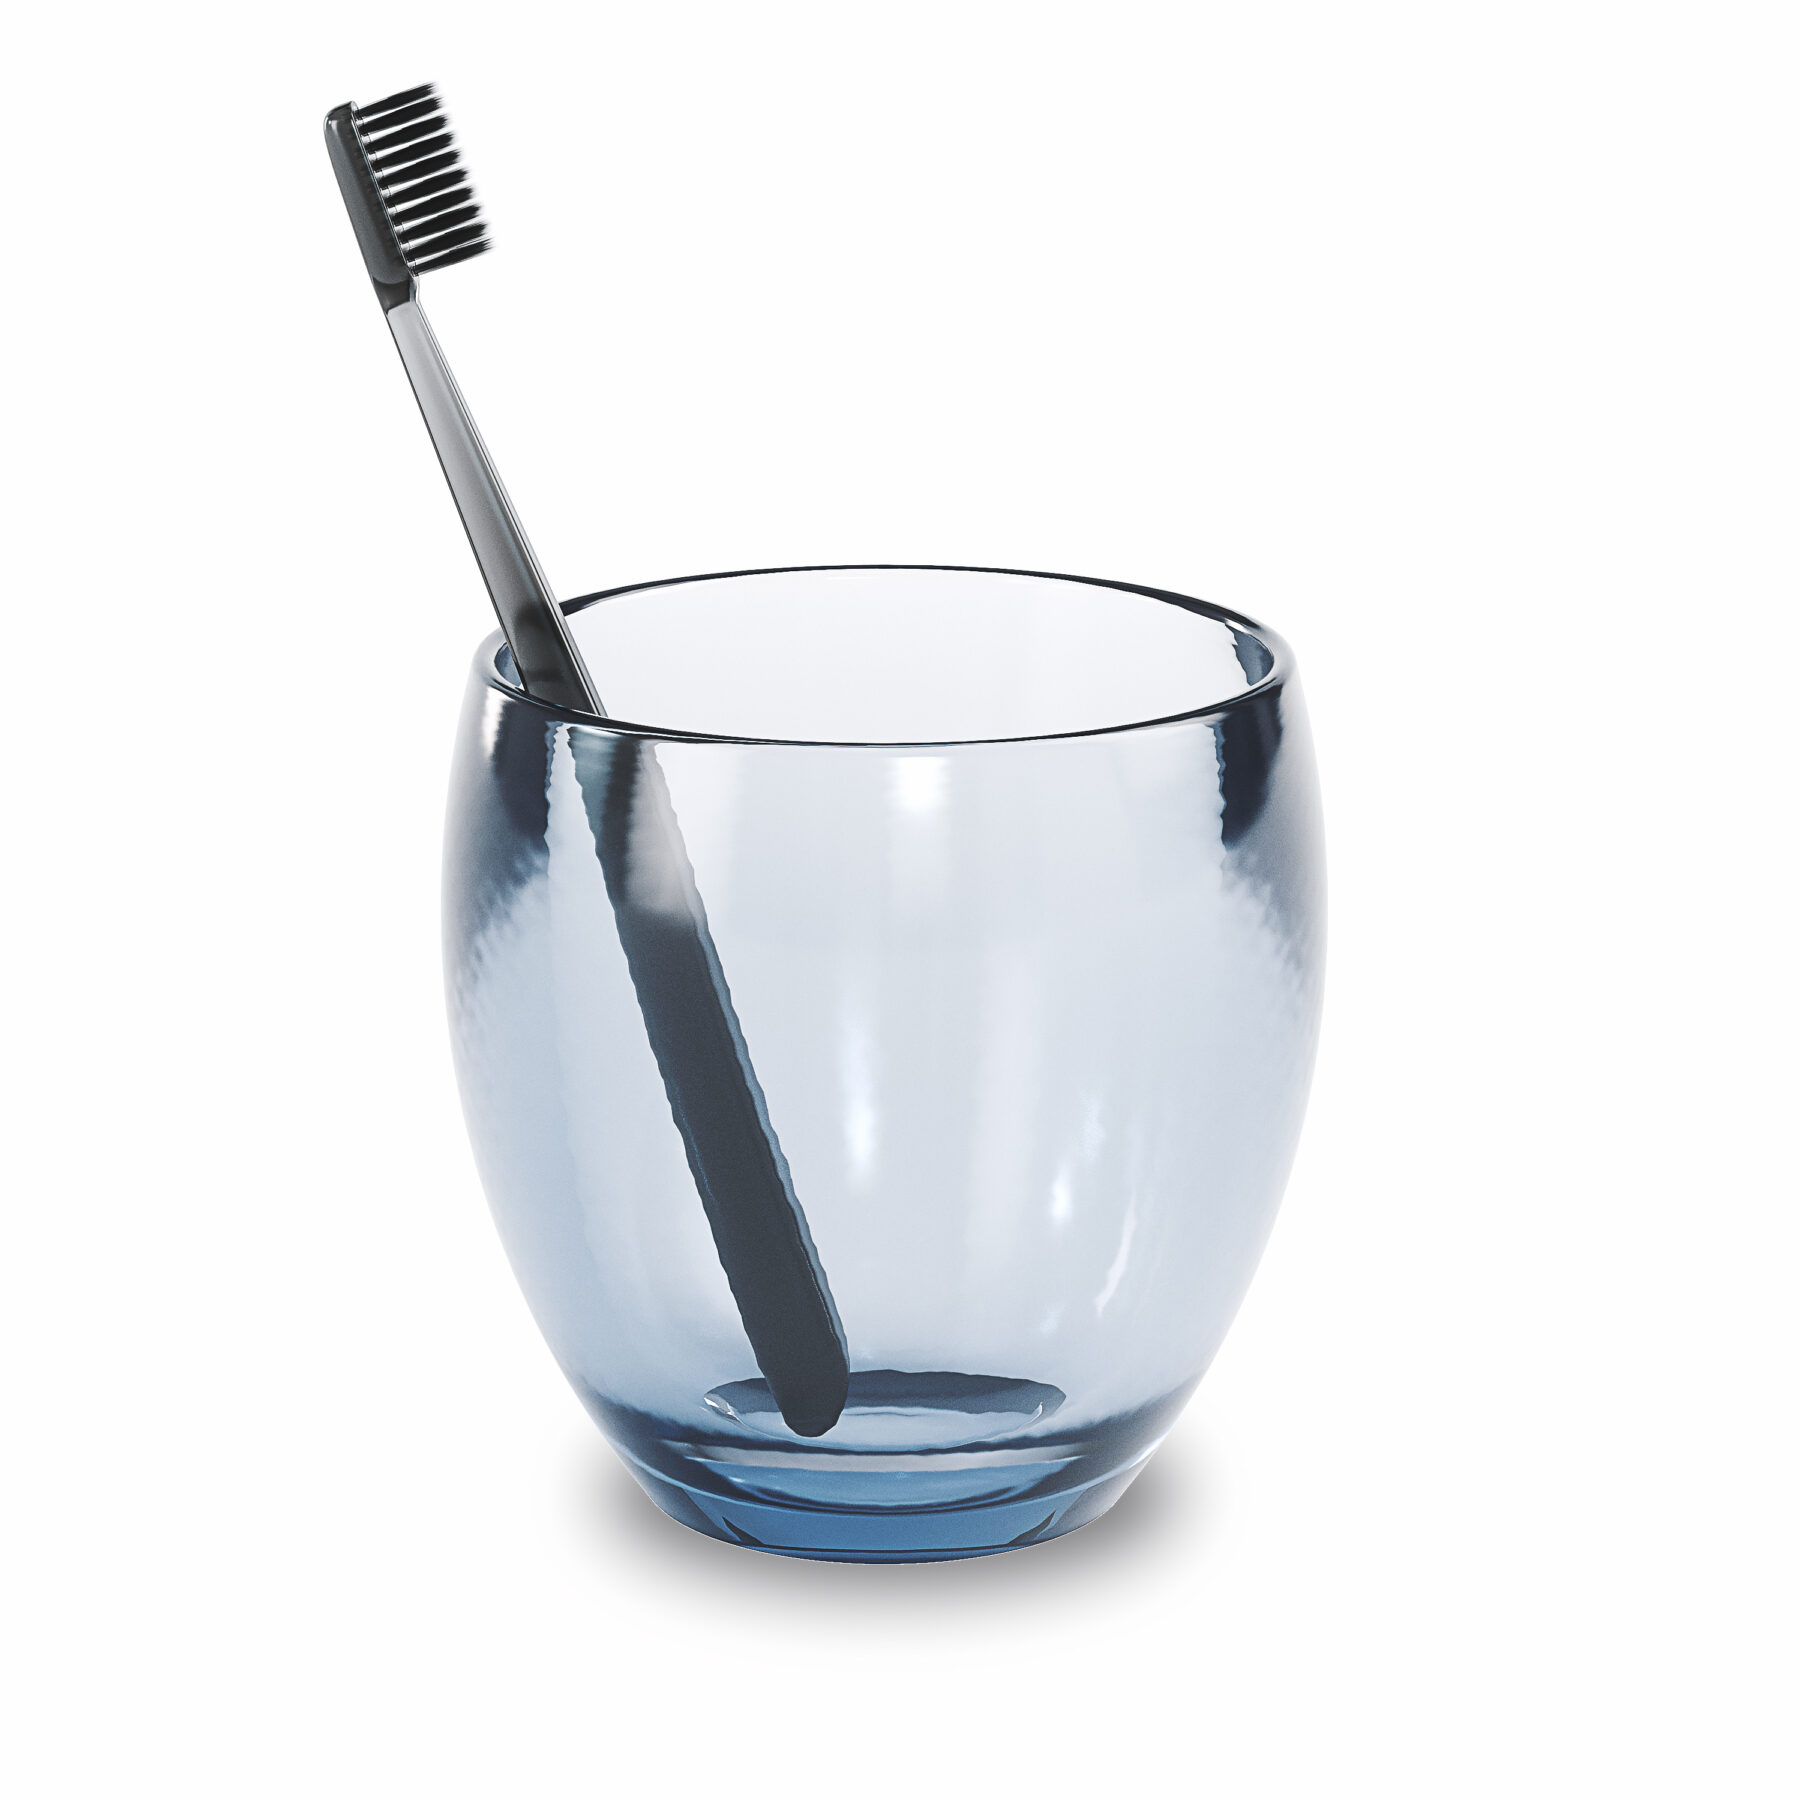 it is break-resistant and perfect for bathroom or kitchen use. This tumbler measures 4 inches (10cm) with a 3.5 inch  (9 cm) diameter. Coordinate your look with the entire Droplet Bath Accessory Collection. U.S. Patent No. D537